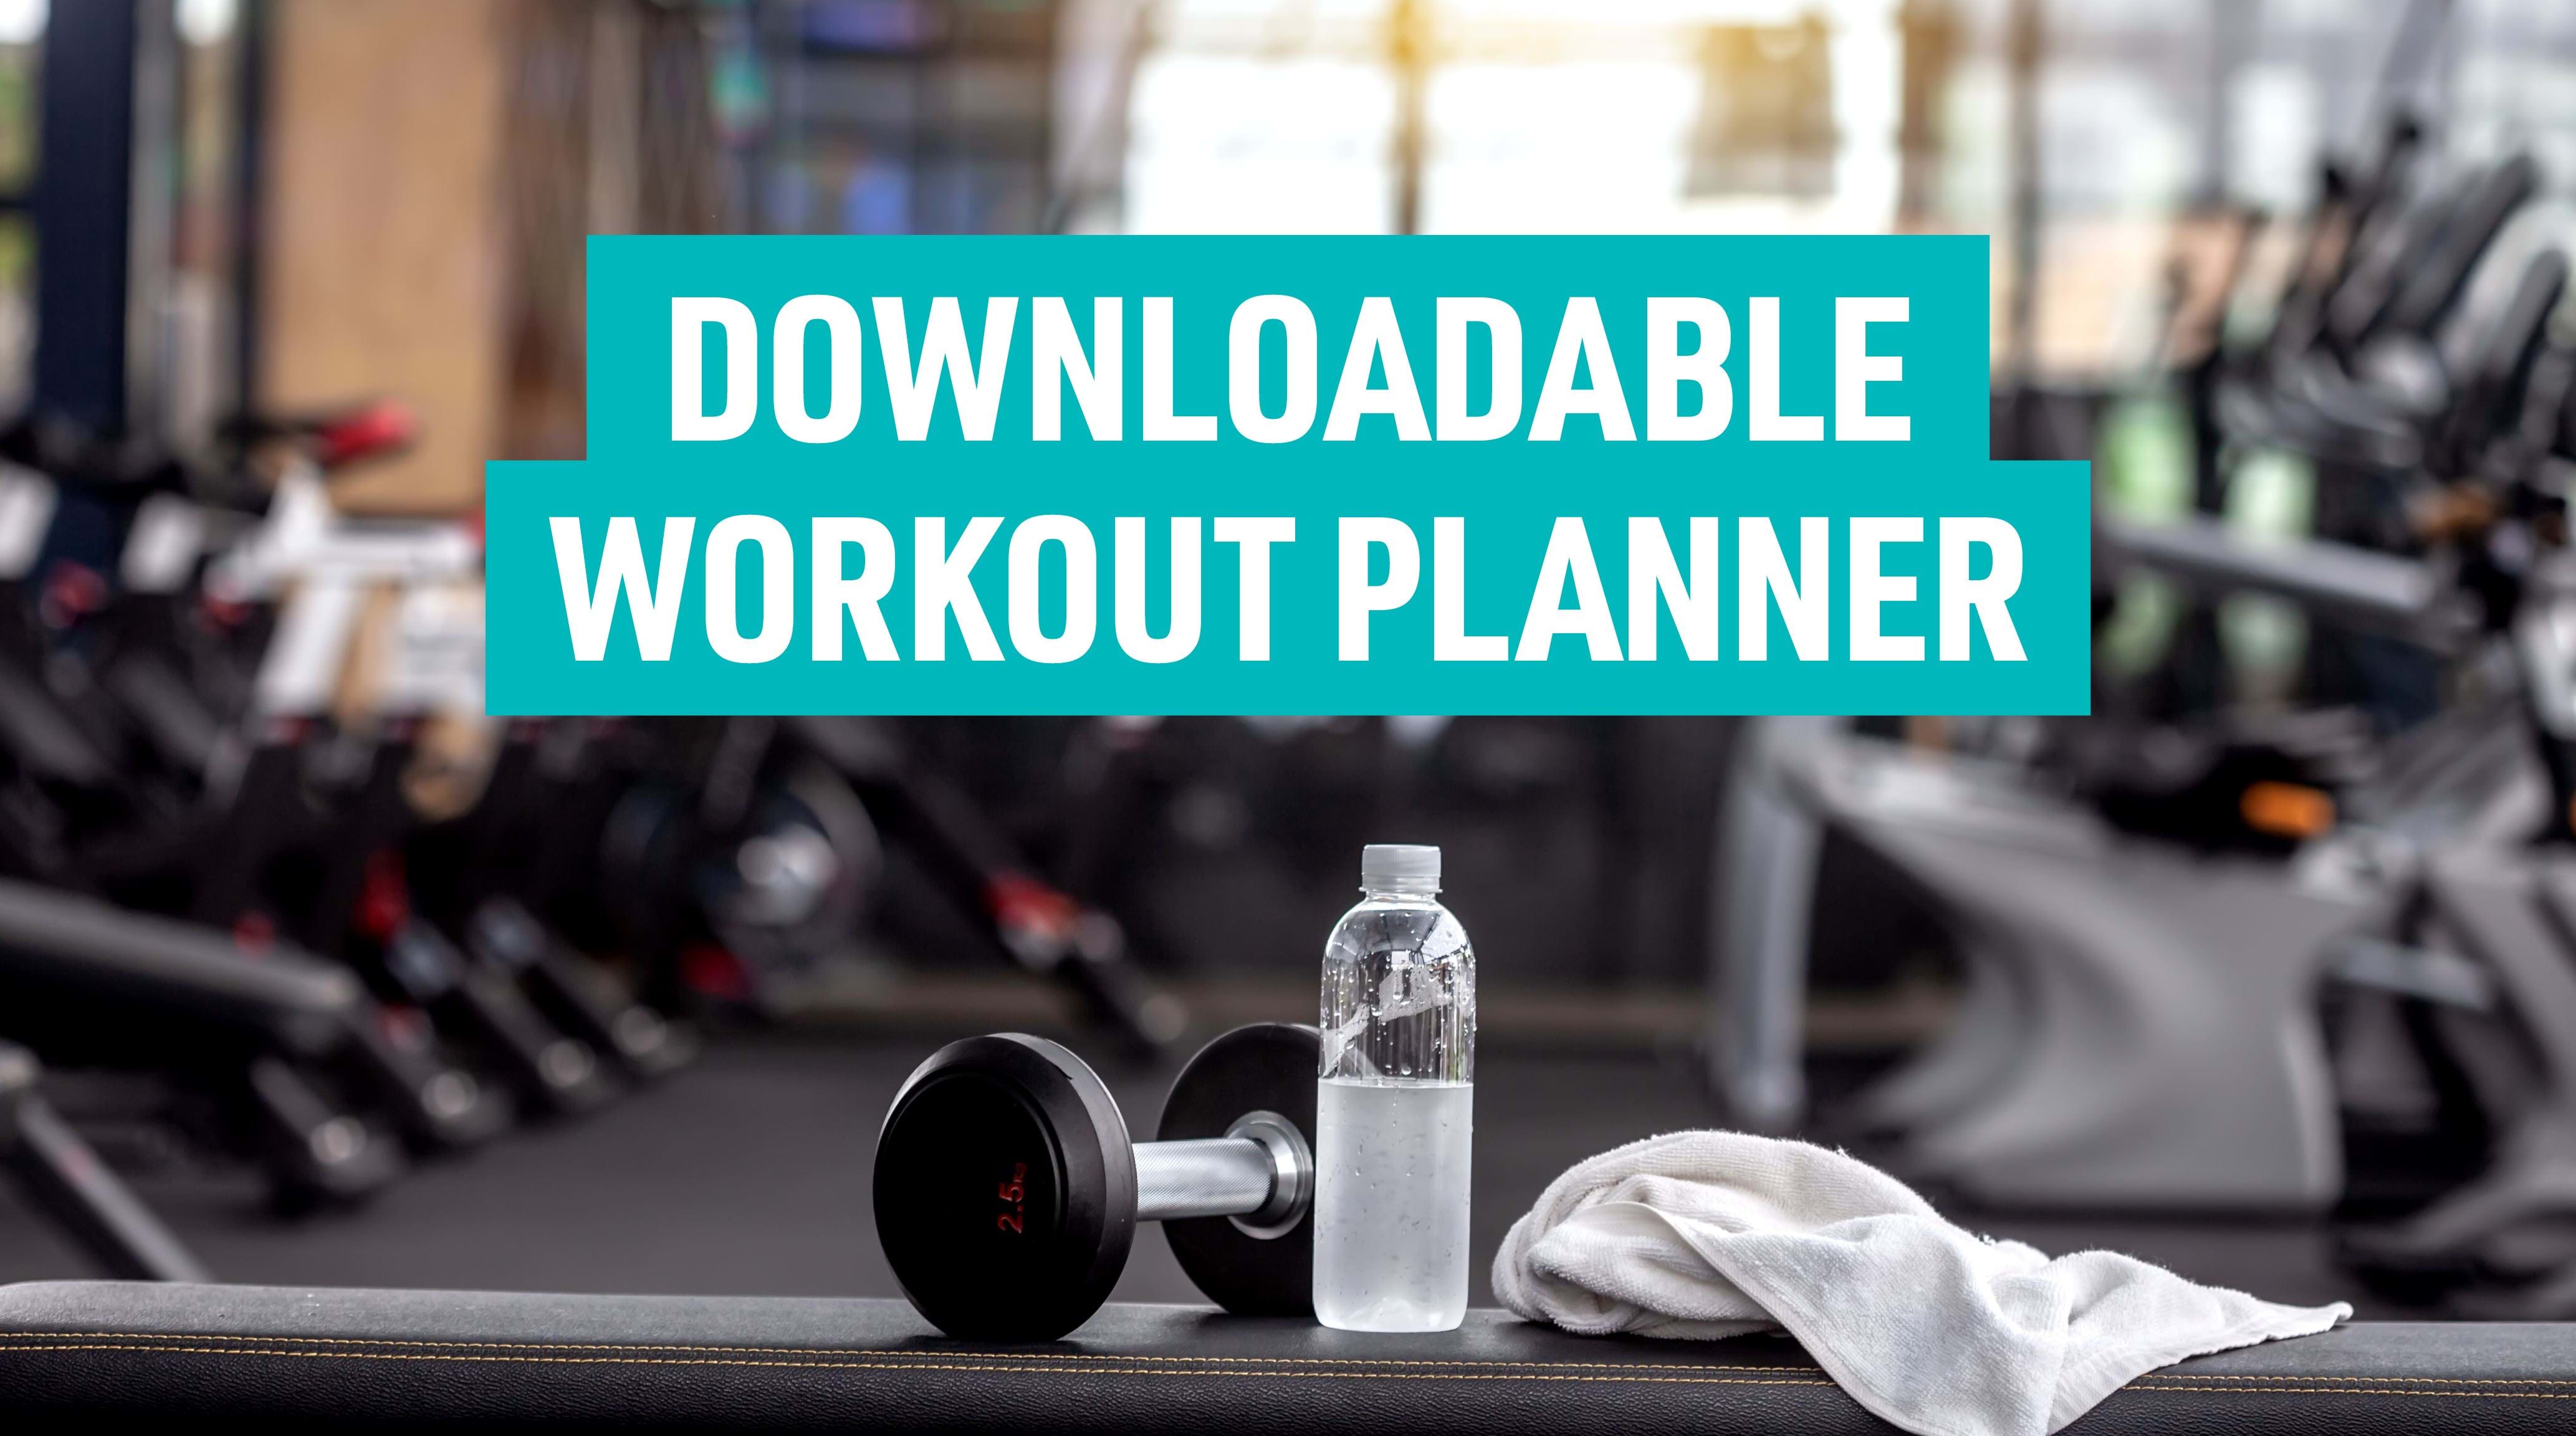 Free Gym Plan: Get Fit and Healthy In 3 Workouts